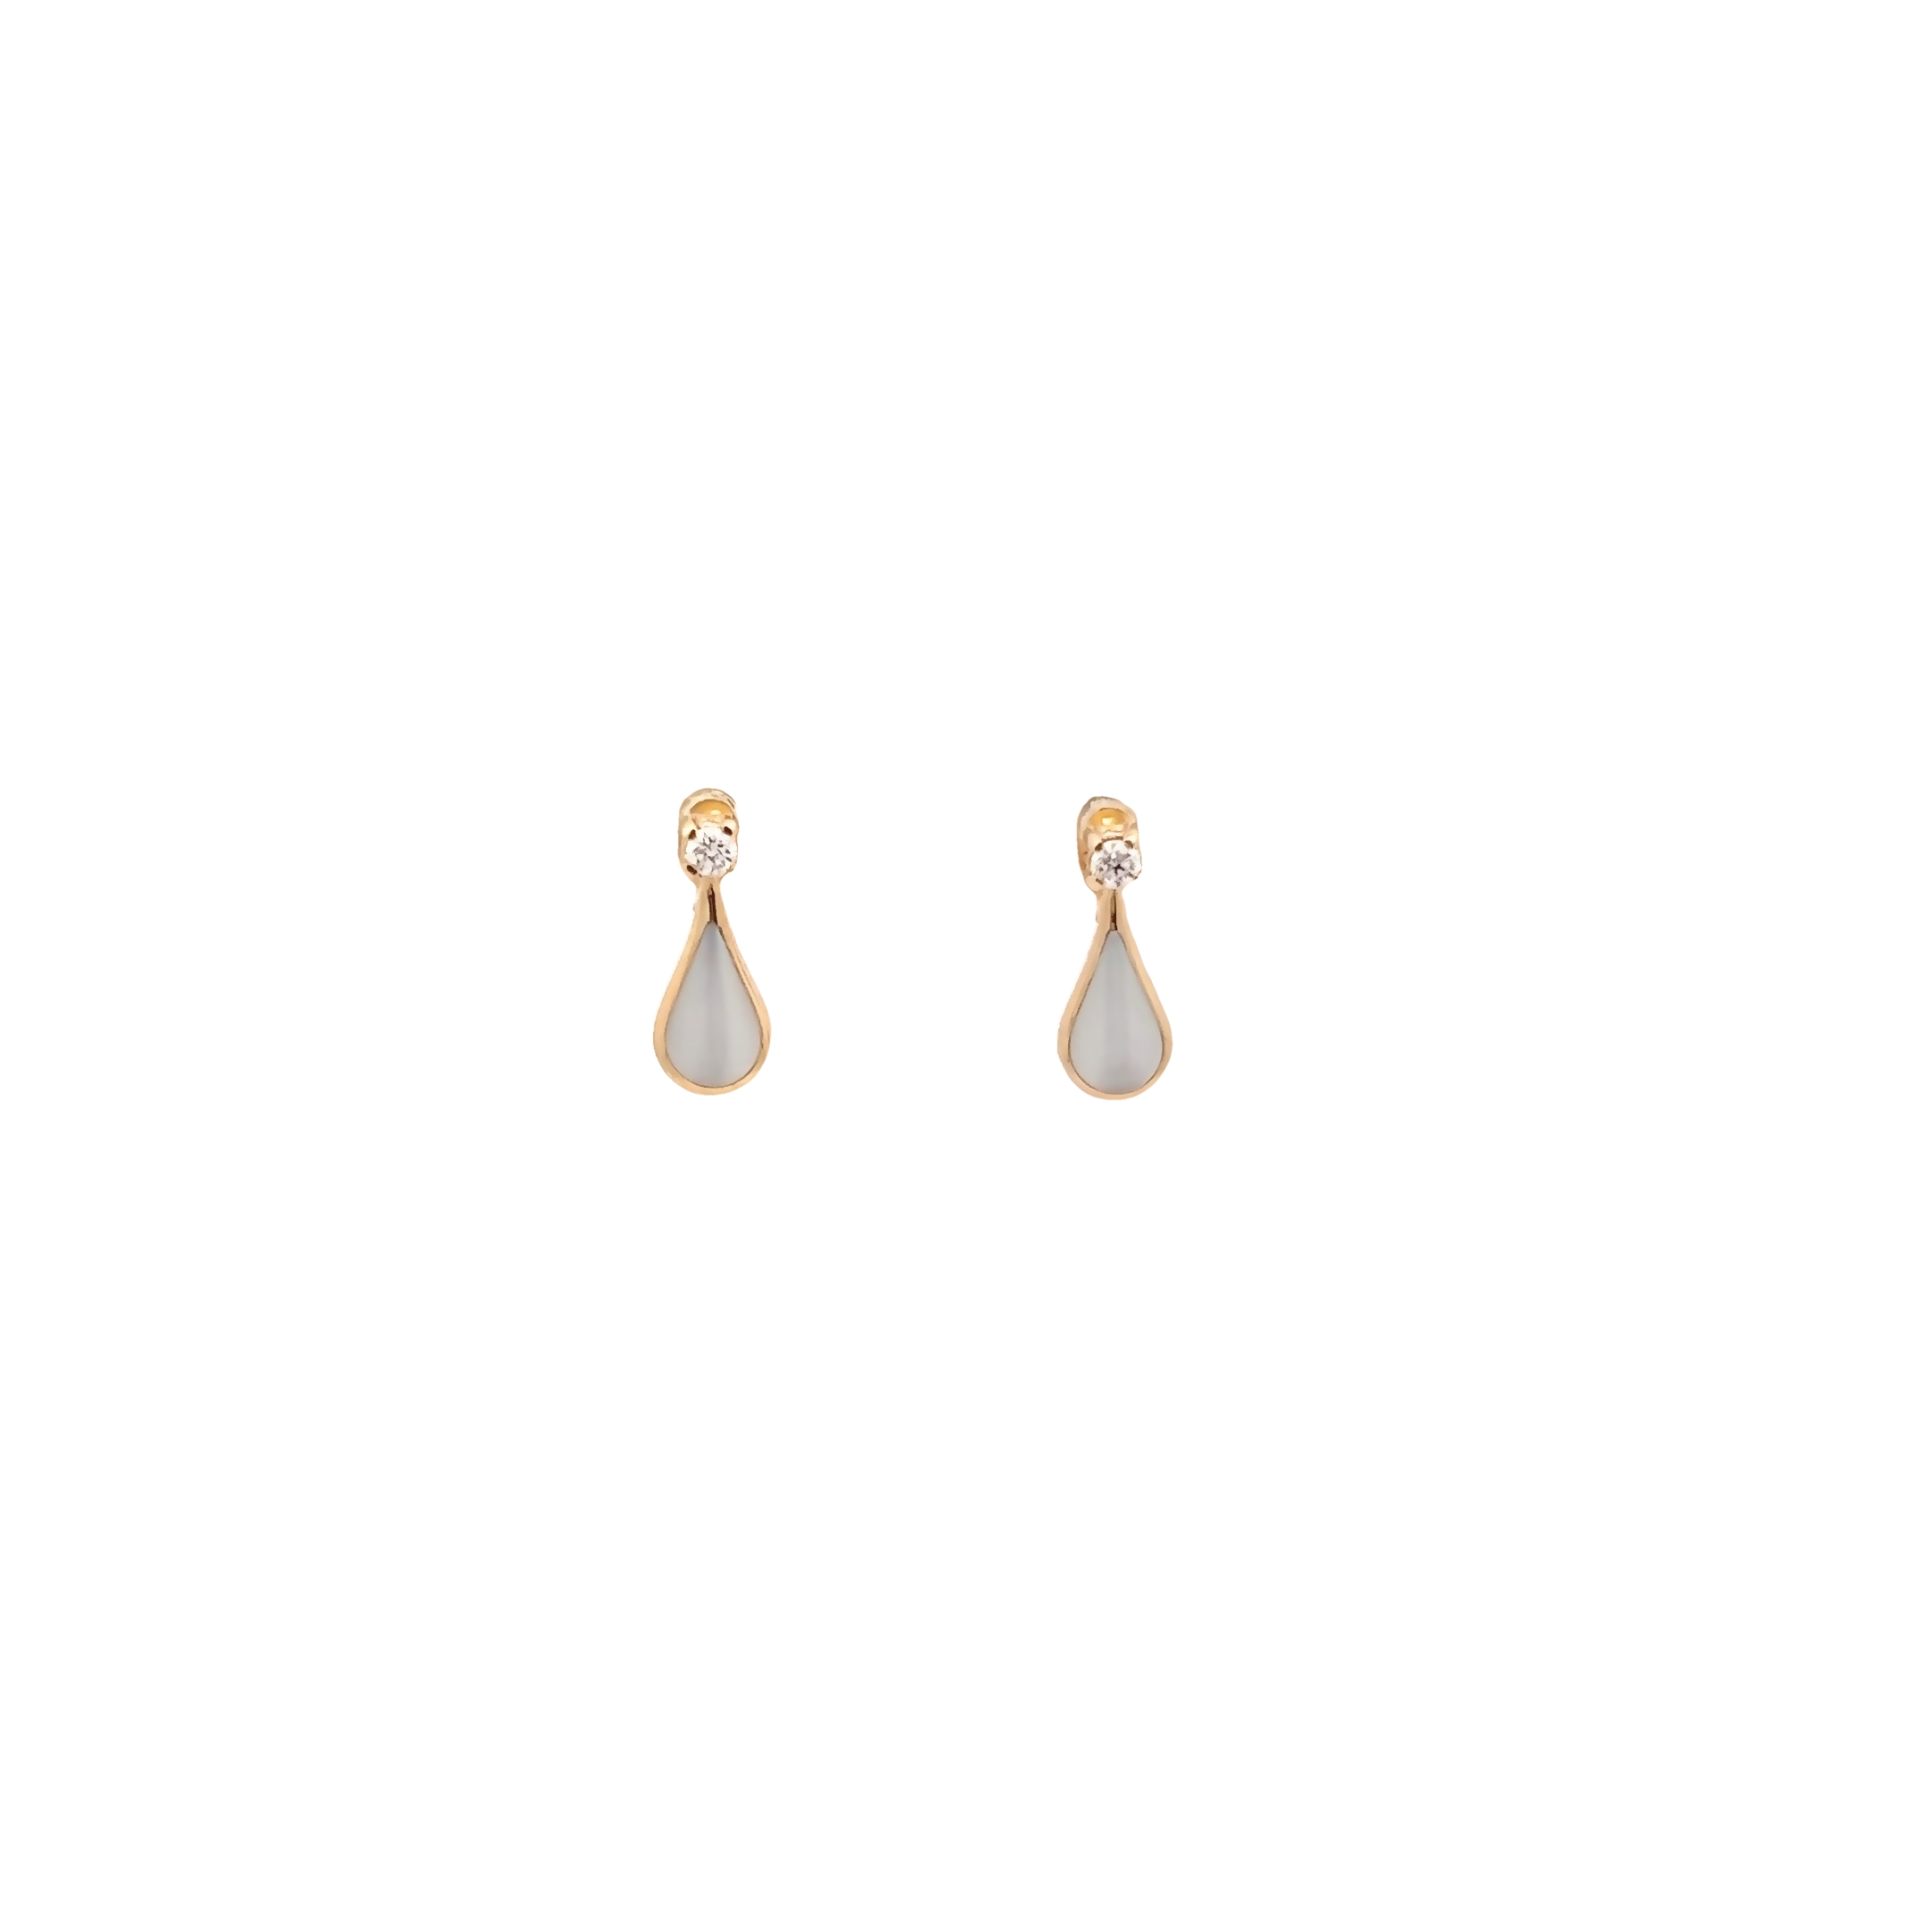 14 Karat yellow gold earrings with 2=0.07 total weight round brilliant G VS Diamonds and white Mother of Pearl inlay.